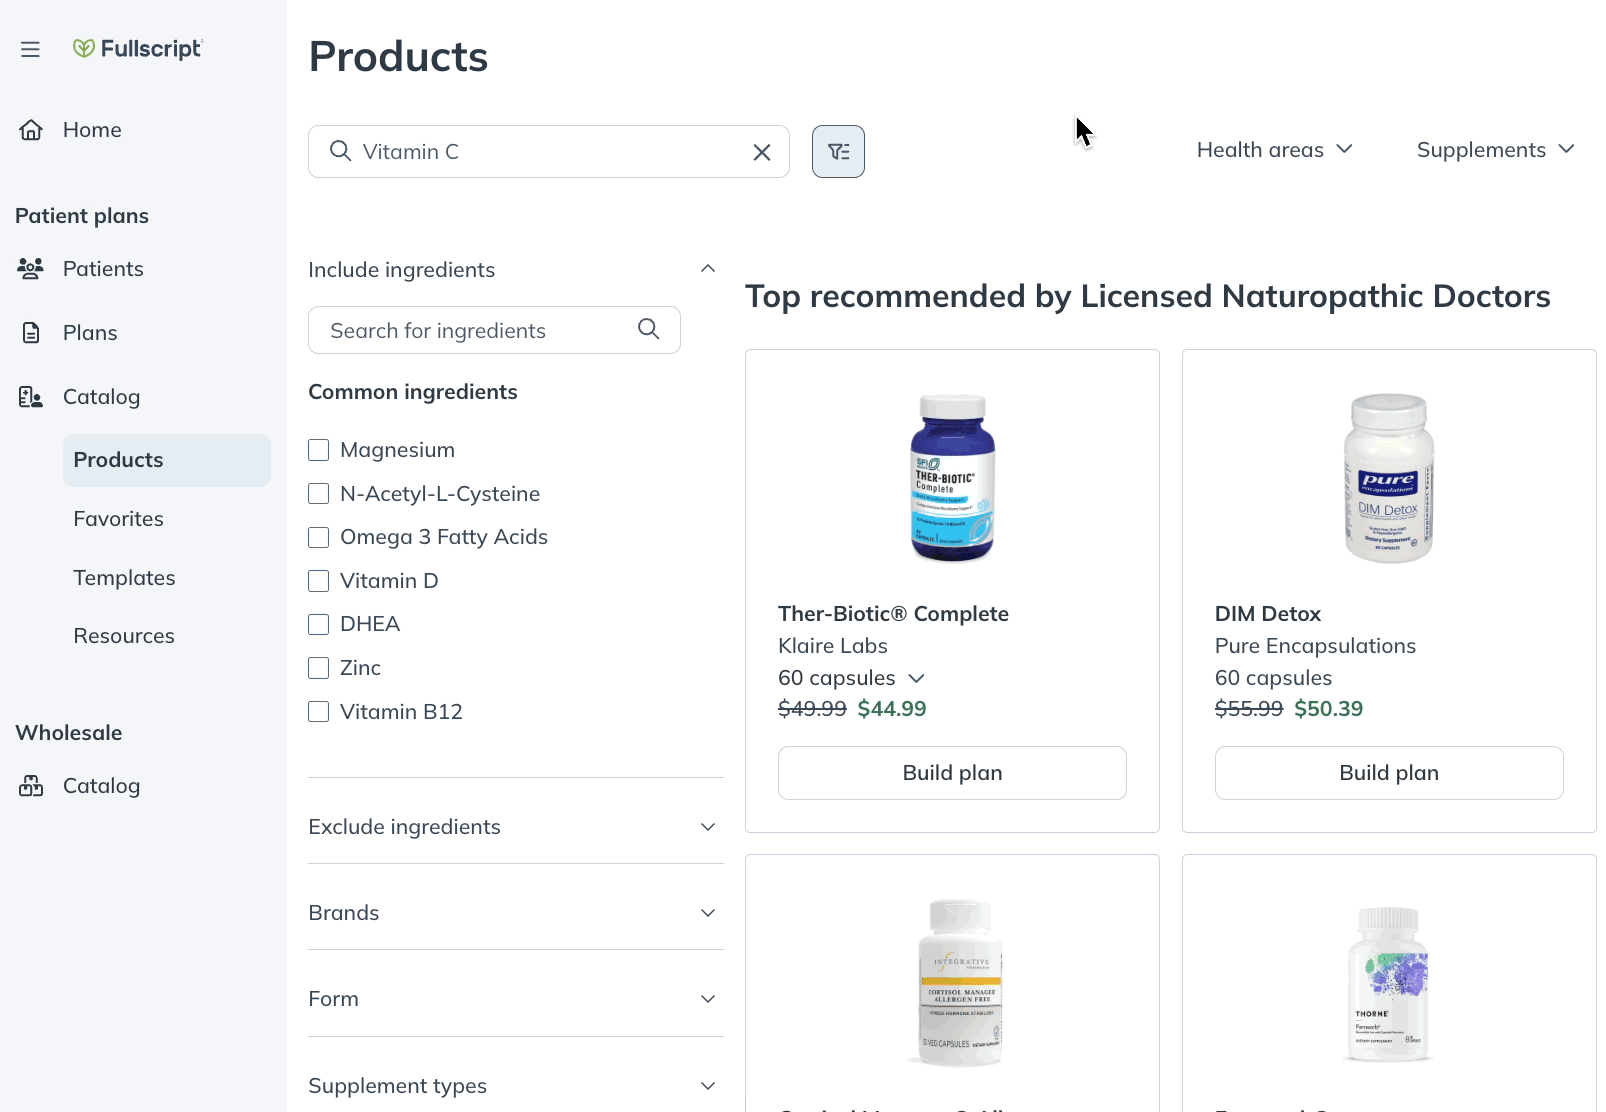 Filtering search results for an included ingredient